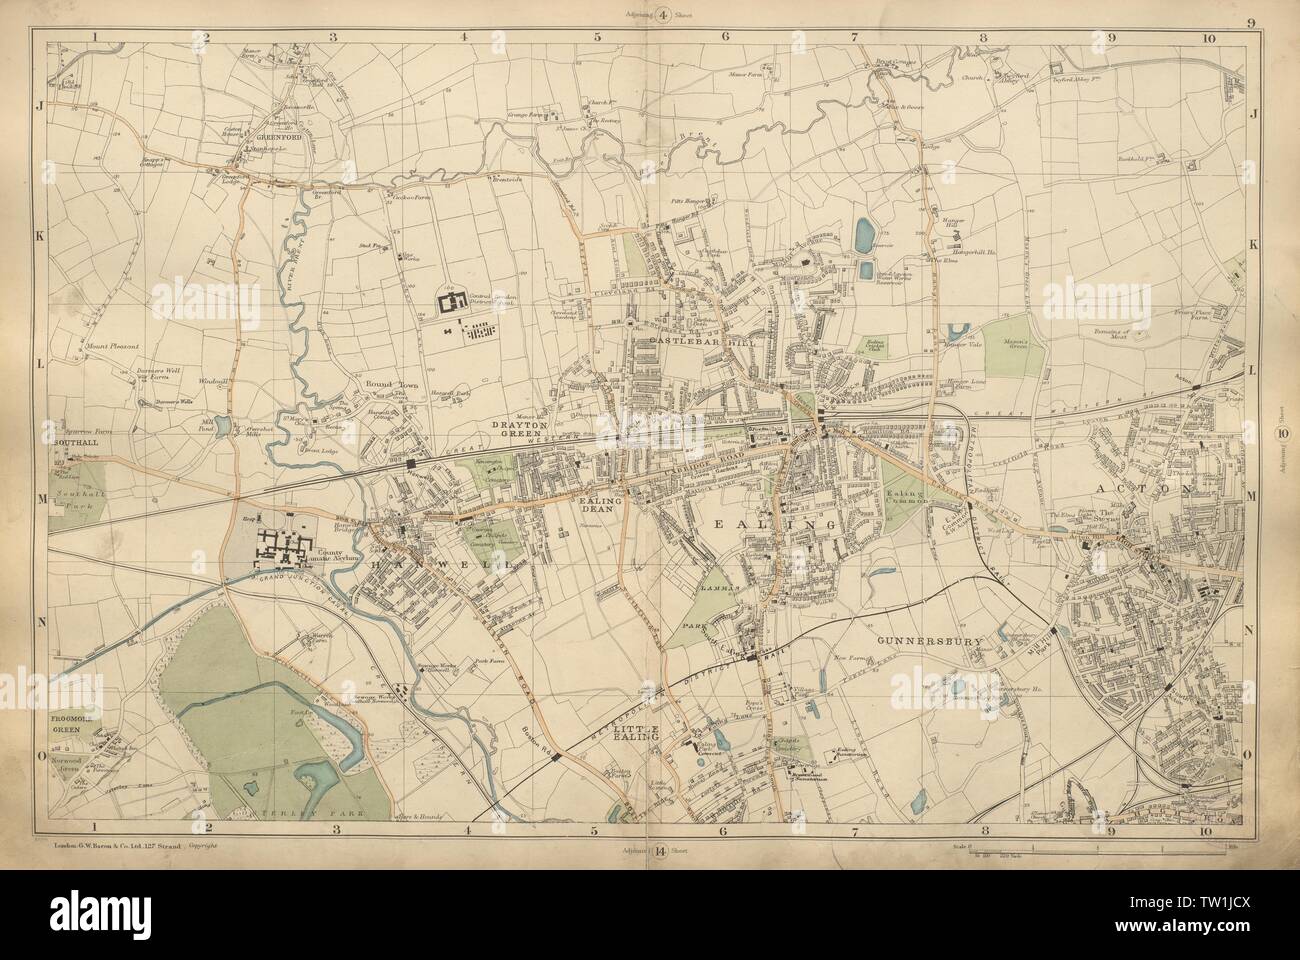 EALING/ACTON Greenford Hanwell Gunnersbury Hanger Lane Perivale BACON 1900 map Banque D'Images